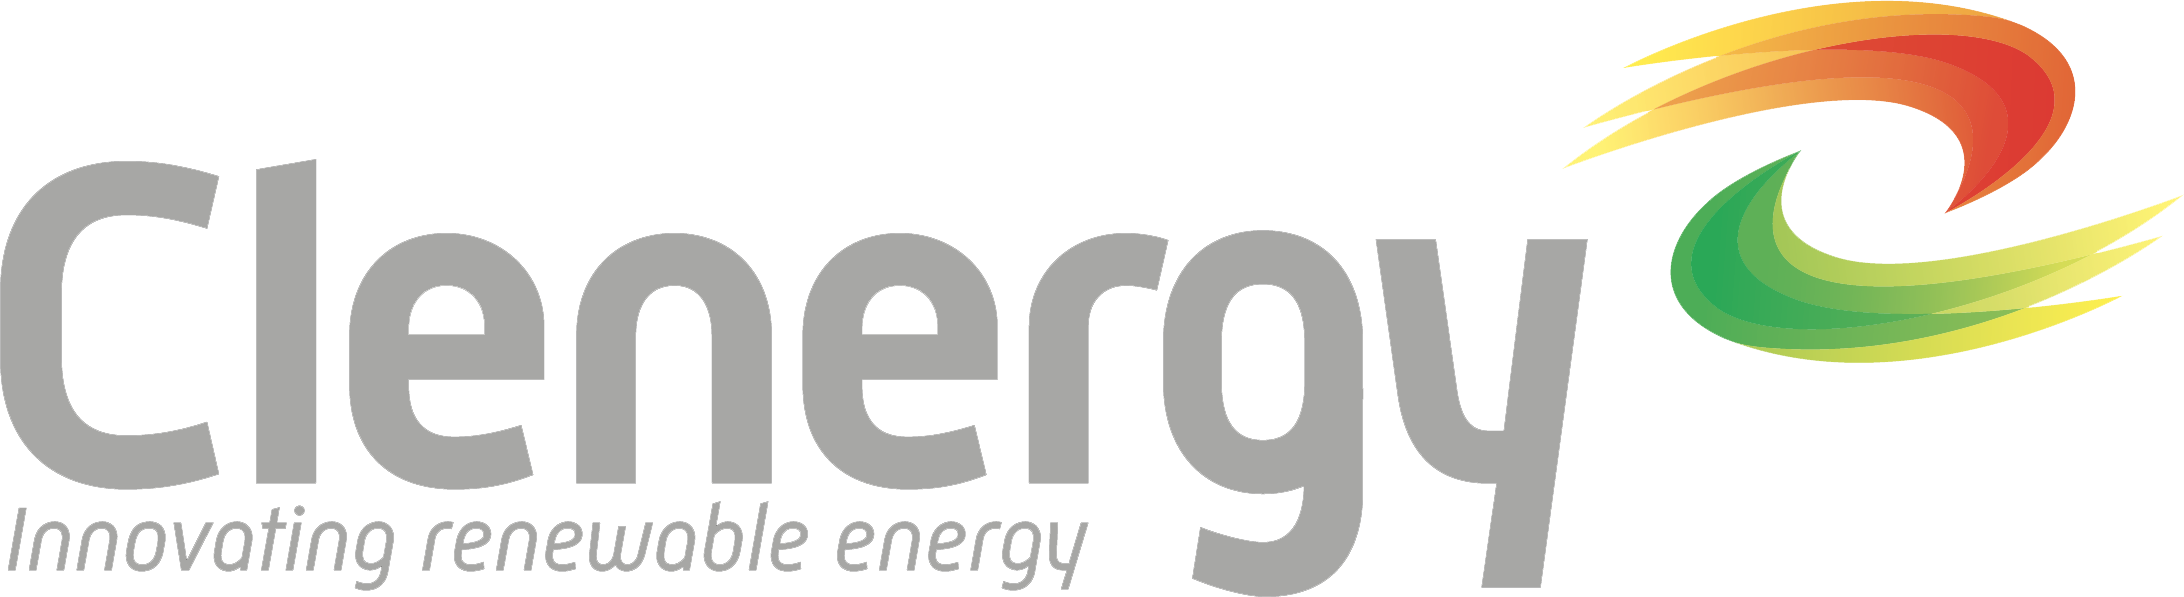 Clenergy_logo.png